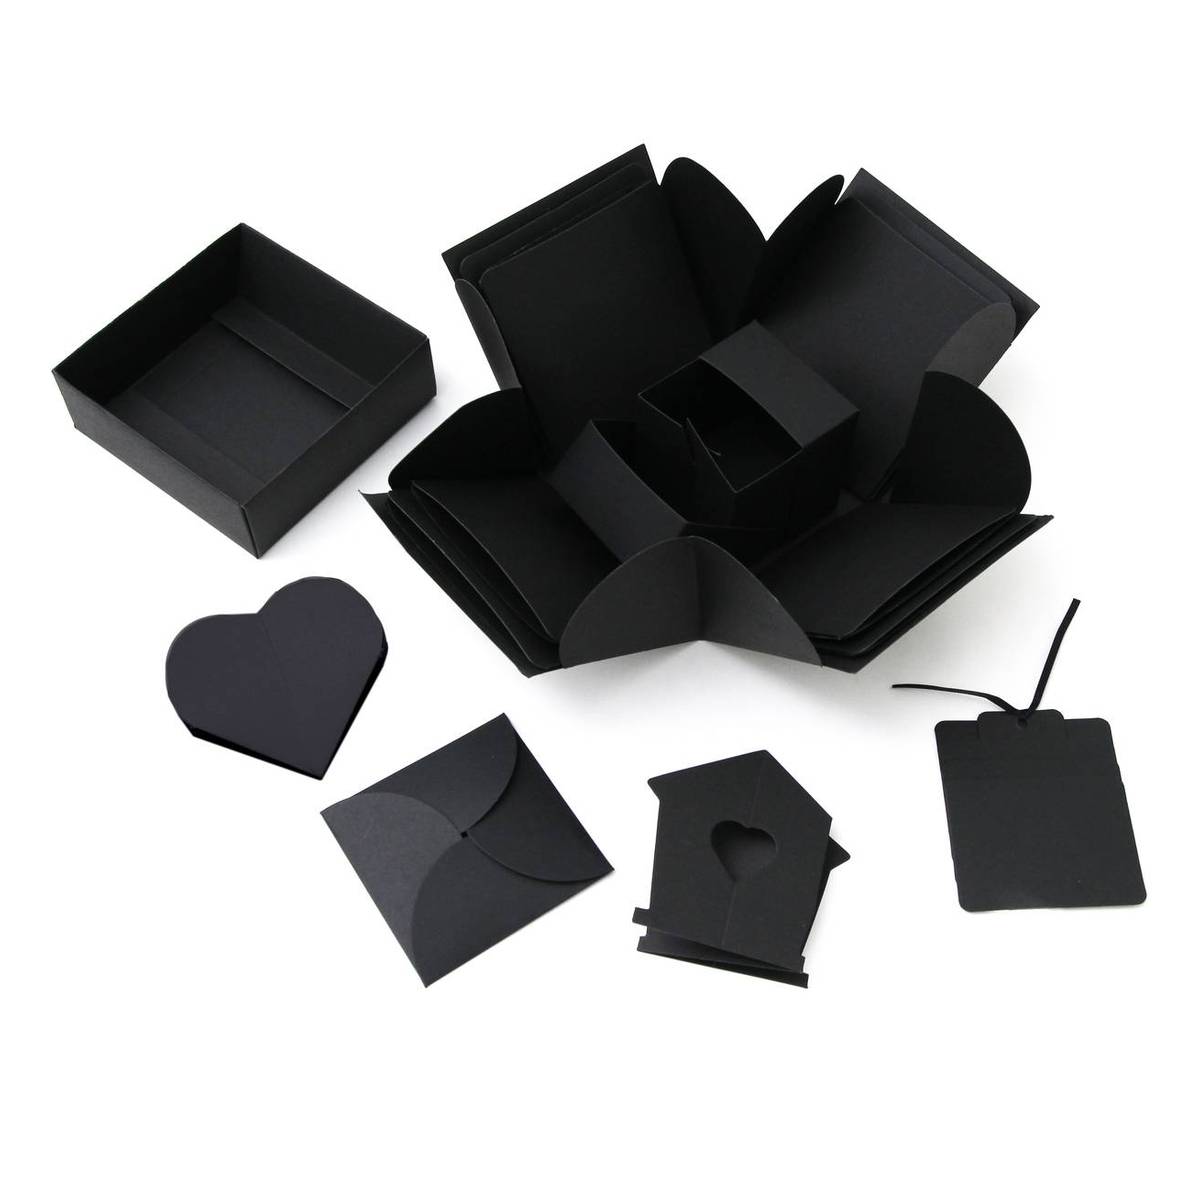 Recollections Large Black Memory Explosion Box - Each